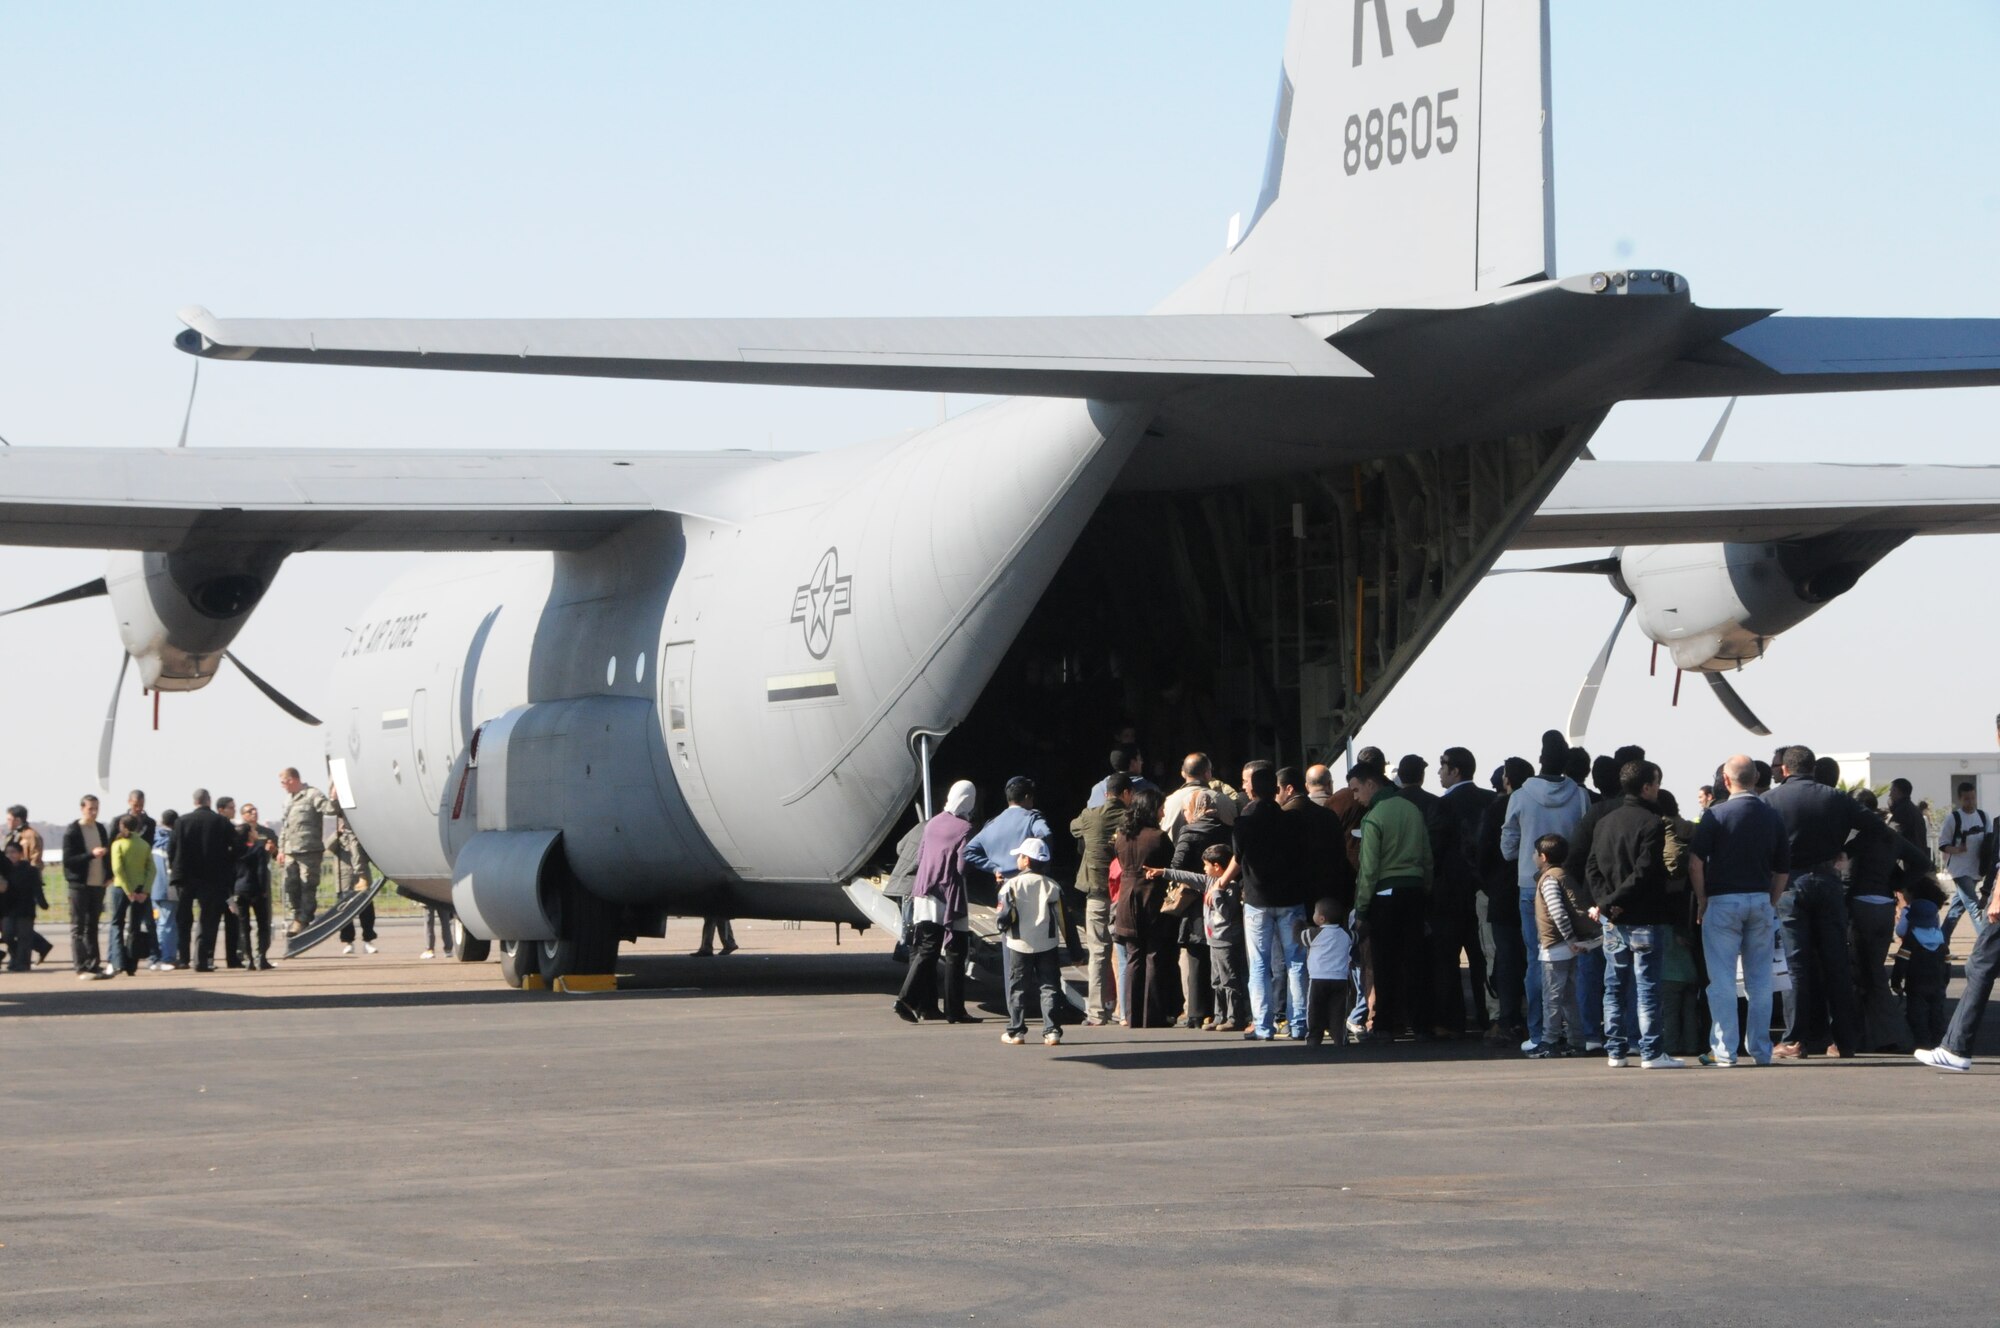 Visitors at the Marrakech Aeroexpo 2010 wait in line to view the inside of a C-130J Super Hercules from the 37th Airlift Squadron, 86th Airlift Wing, Ramstein Air Base, Germany, Jan. 30. The Aeroexpo involved static displays of the C-130J, two F-16s from the 169th Fighter Wing, South Carolina ANG; and a KC-135 Stratotanker from the 151st Air Refueling Wing, Utah ANG. (U.S. Air Force photo by Staff Sgt. Stefanie Torres)